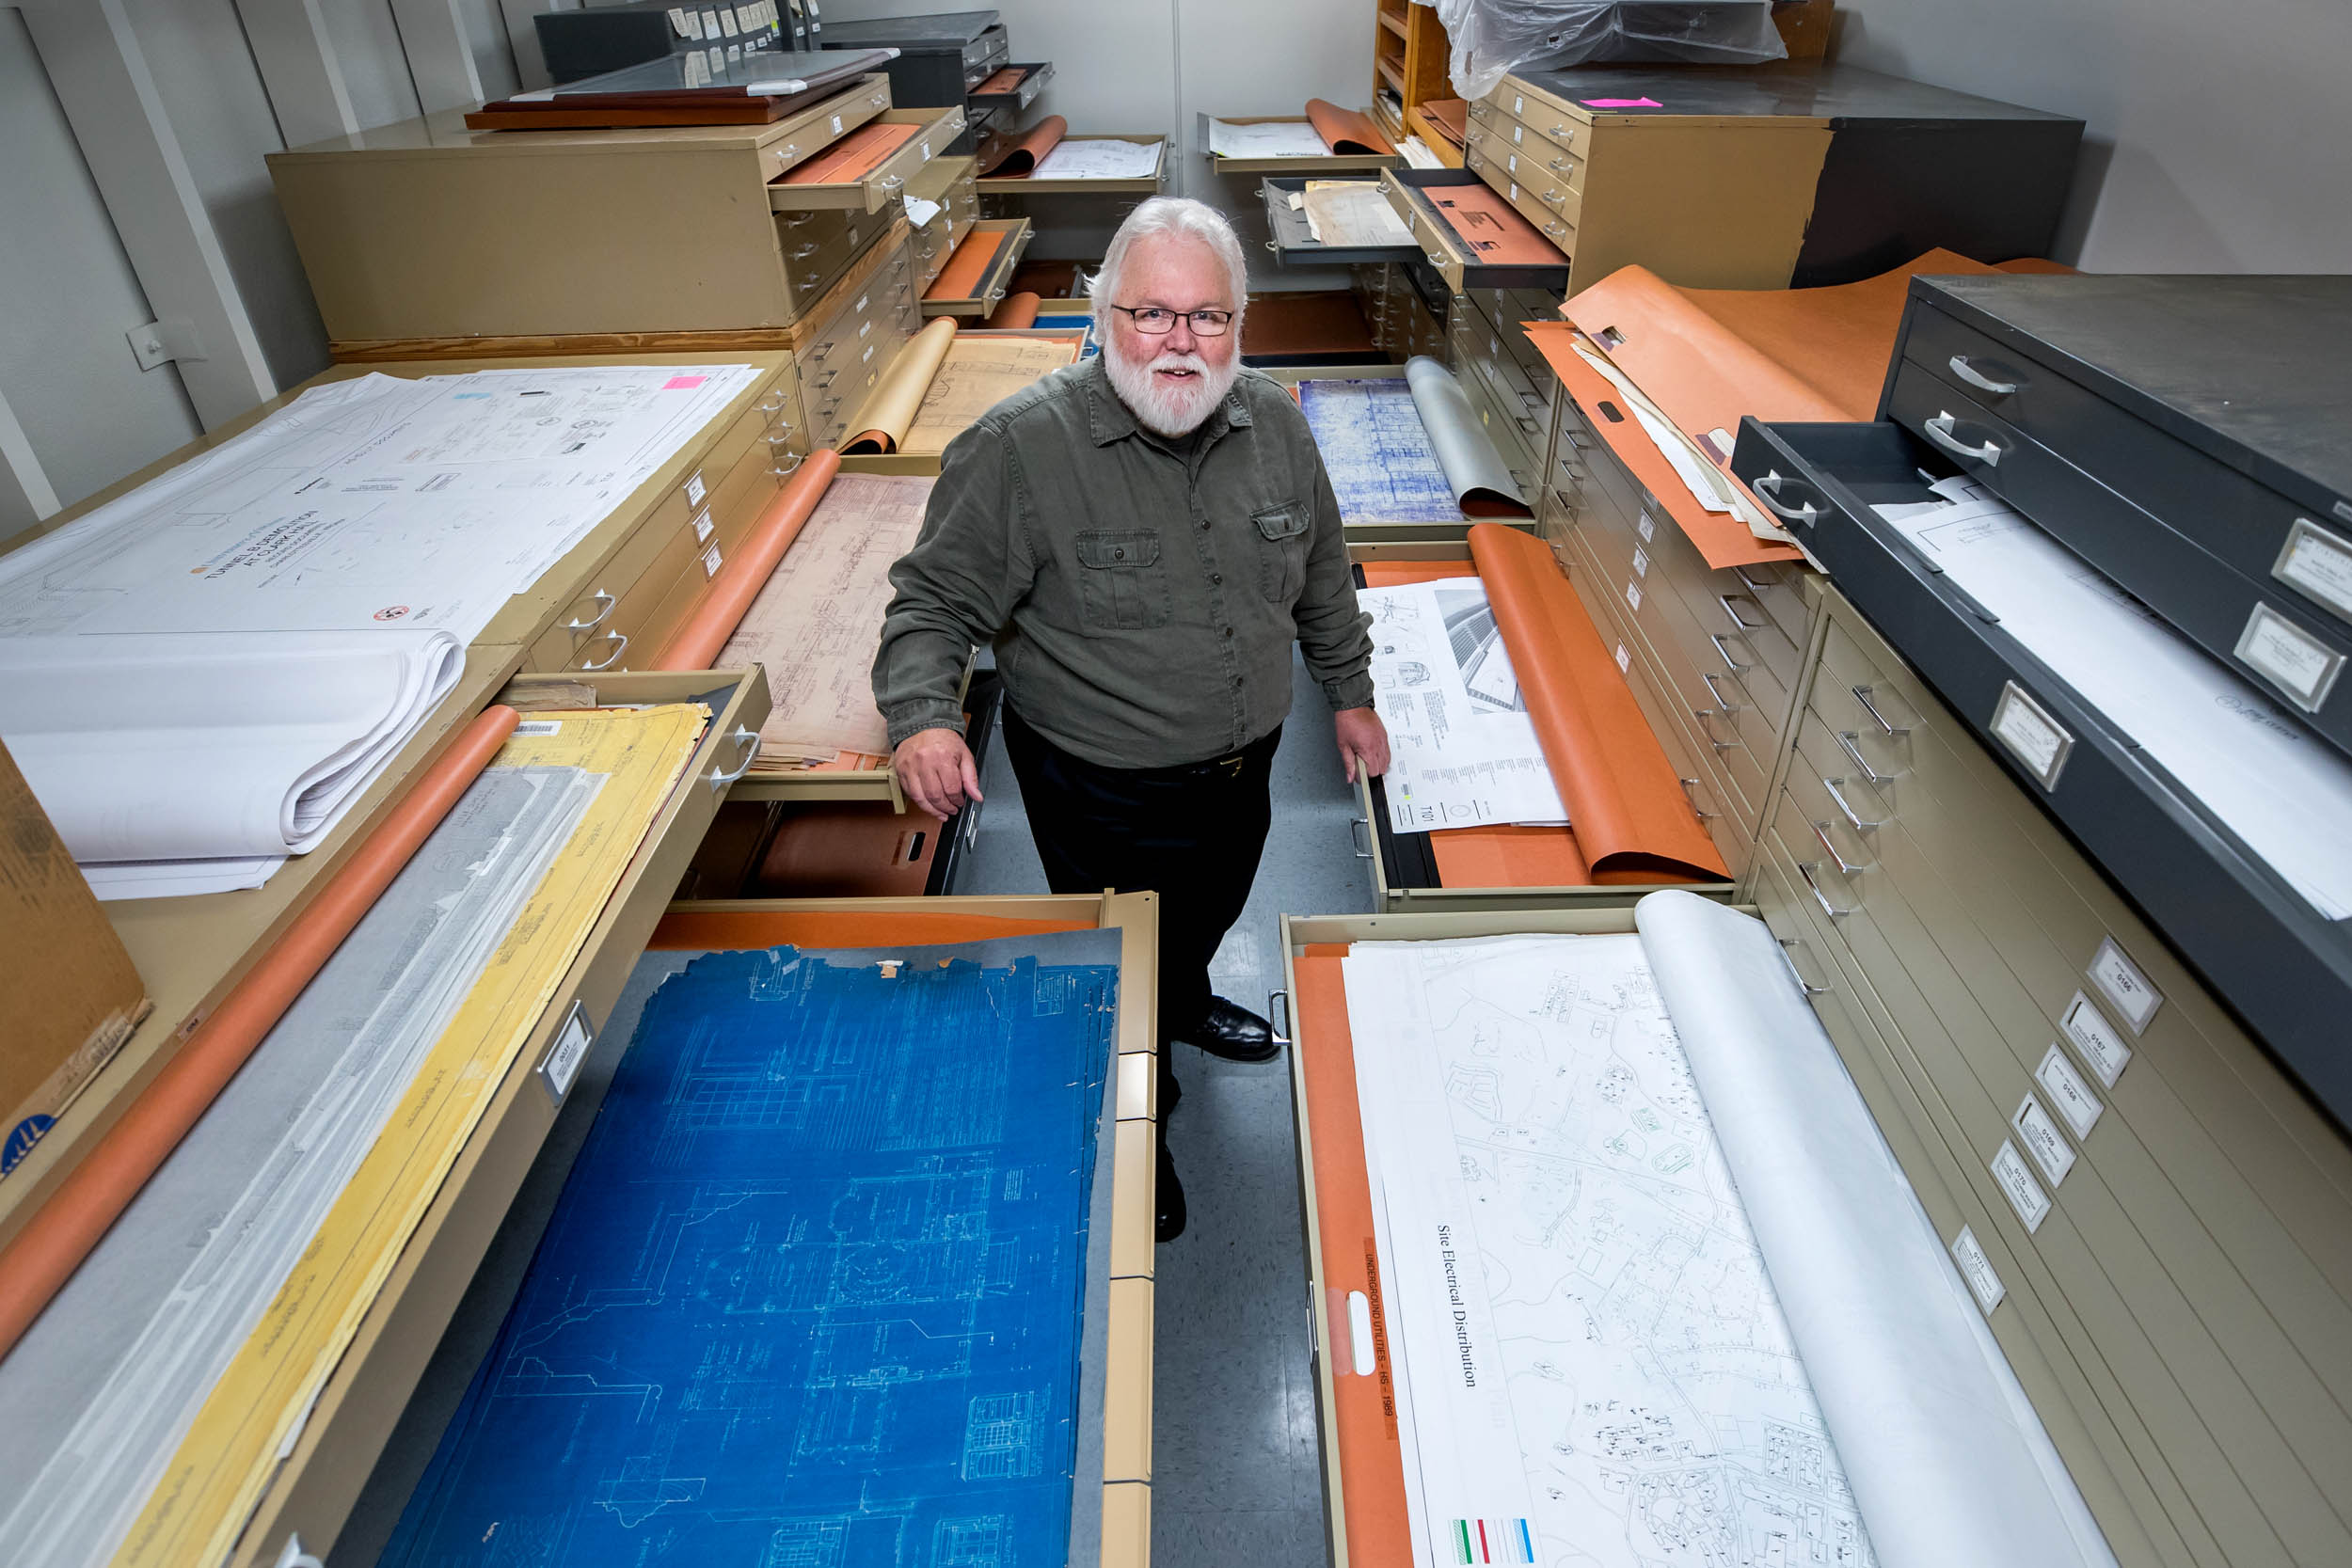 Garth Anderson manages an extensive database of building designs that includes hundreds of years of building plans. (Photo by Sanjay Suchak, University Communications)